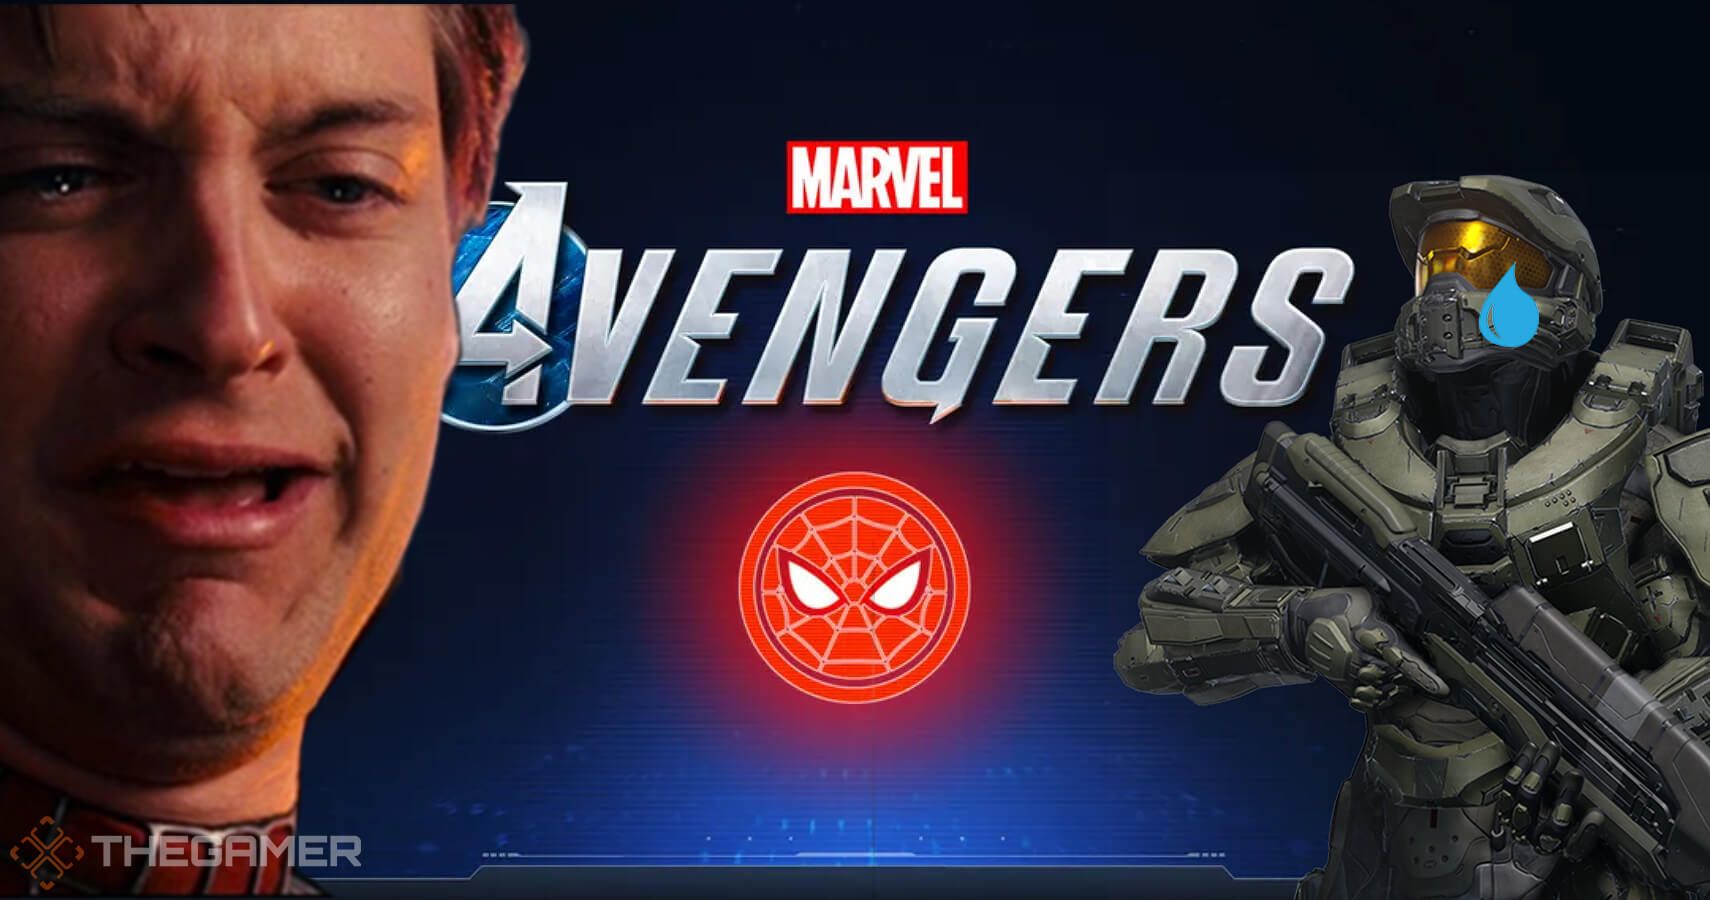 Marvels Avengers Confirms SpiderMan Will (Unfortunately) Be Exclusive To PlayStation